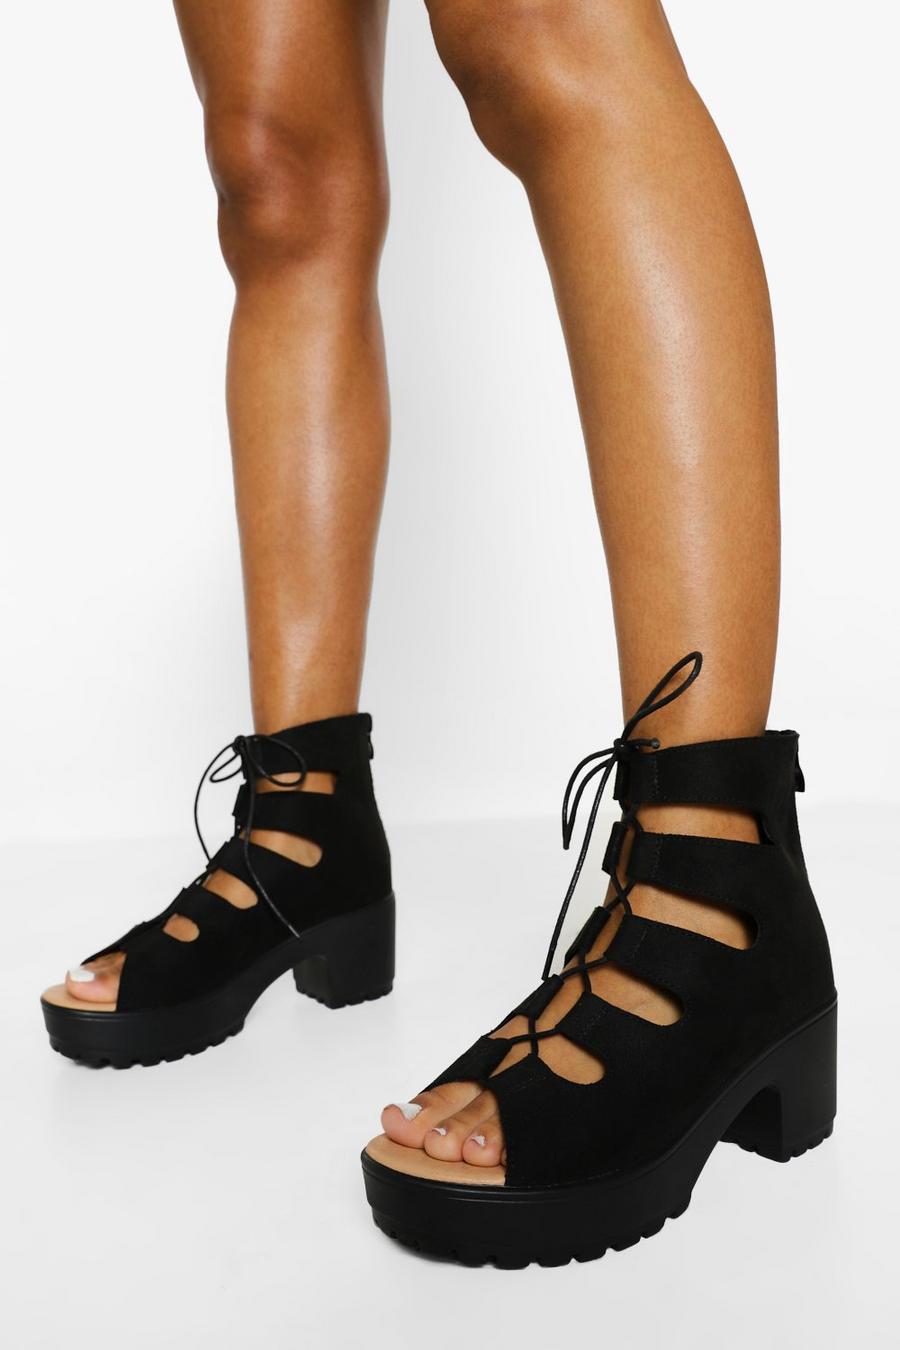 Black Cleated Peep Toe Lace Up Sandals